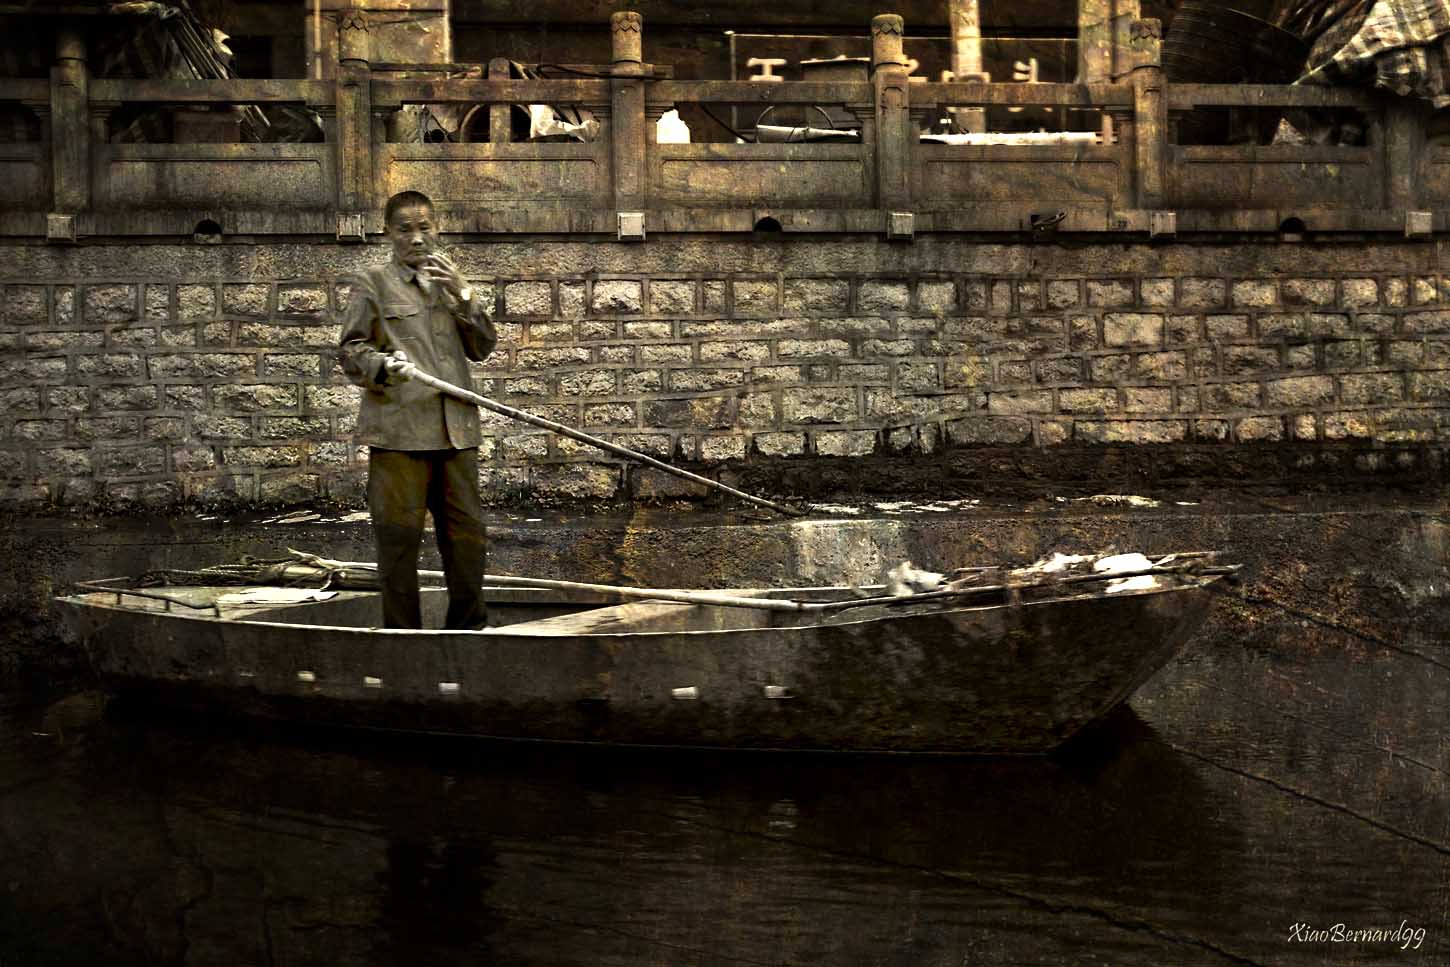 JINAN.Cleaner with the Cigaret on the Canal